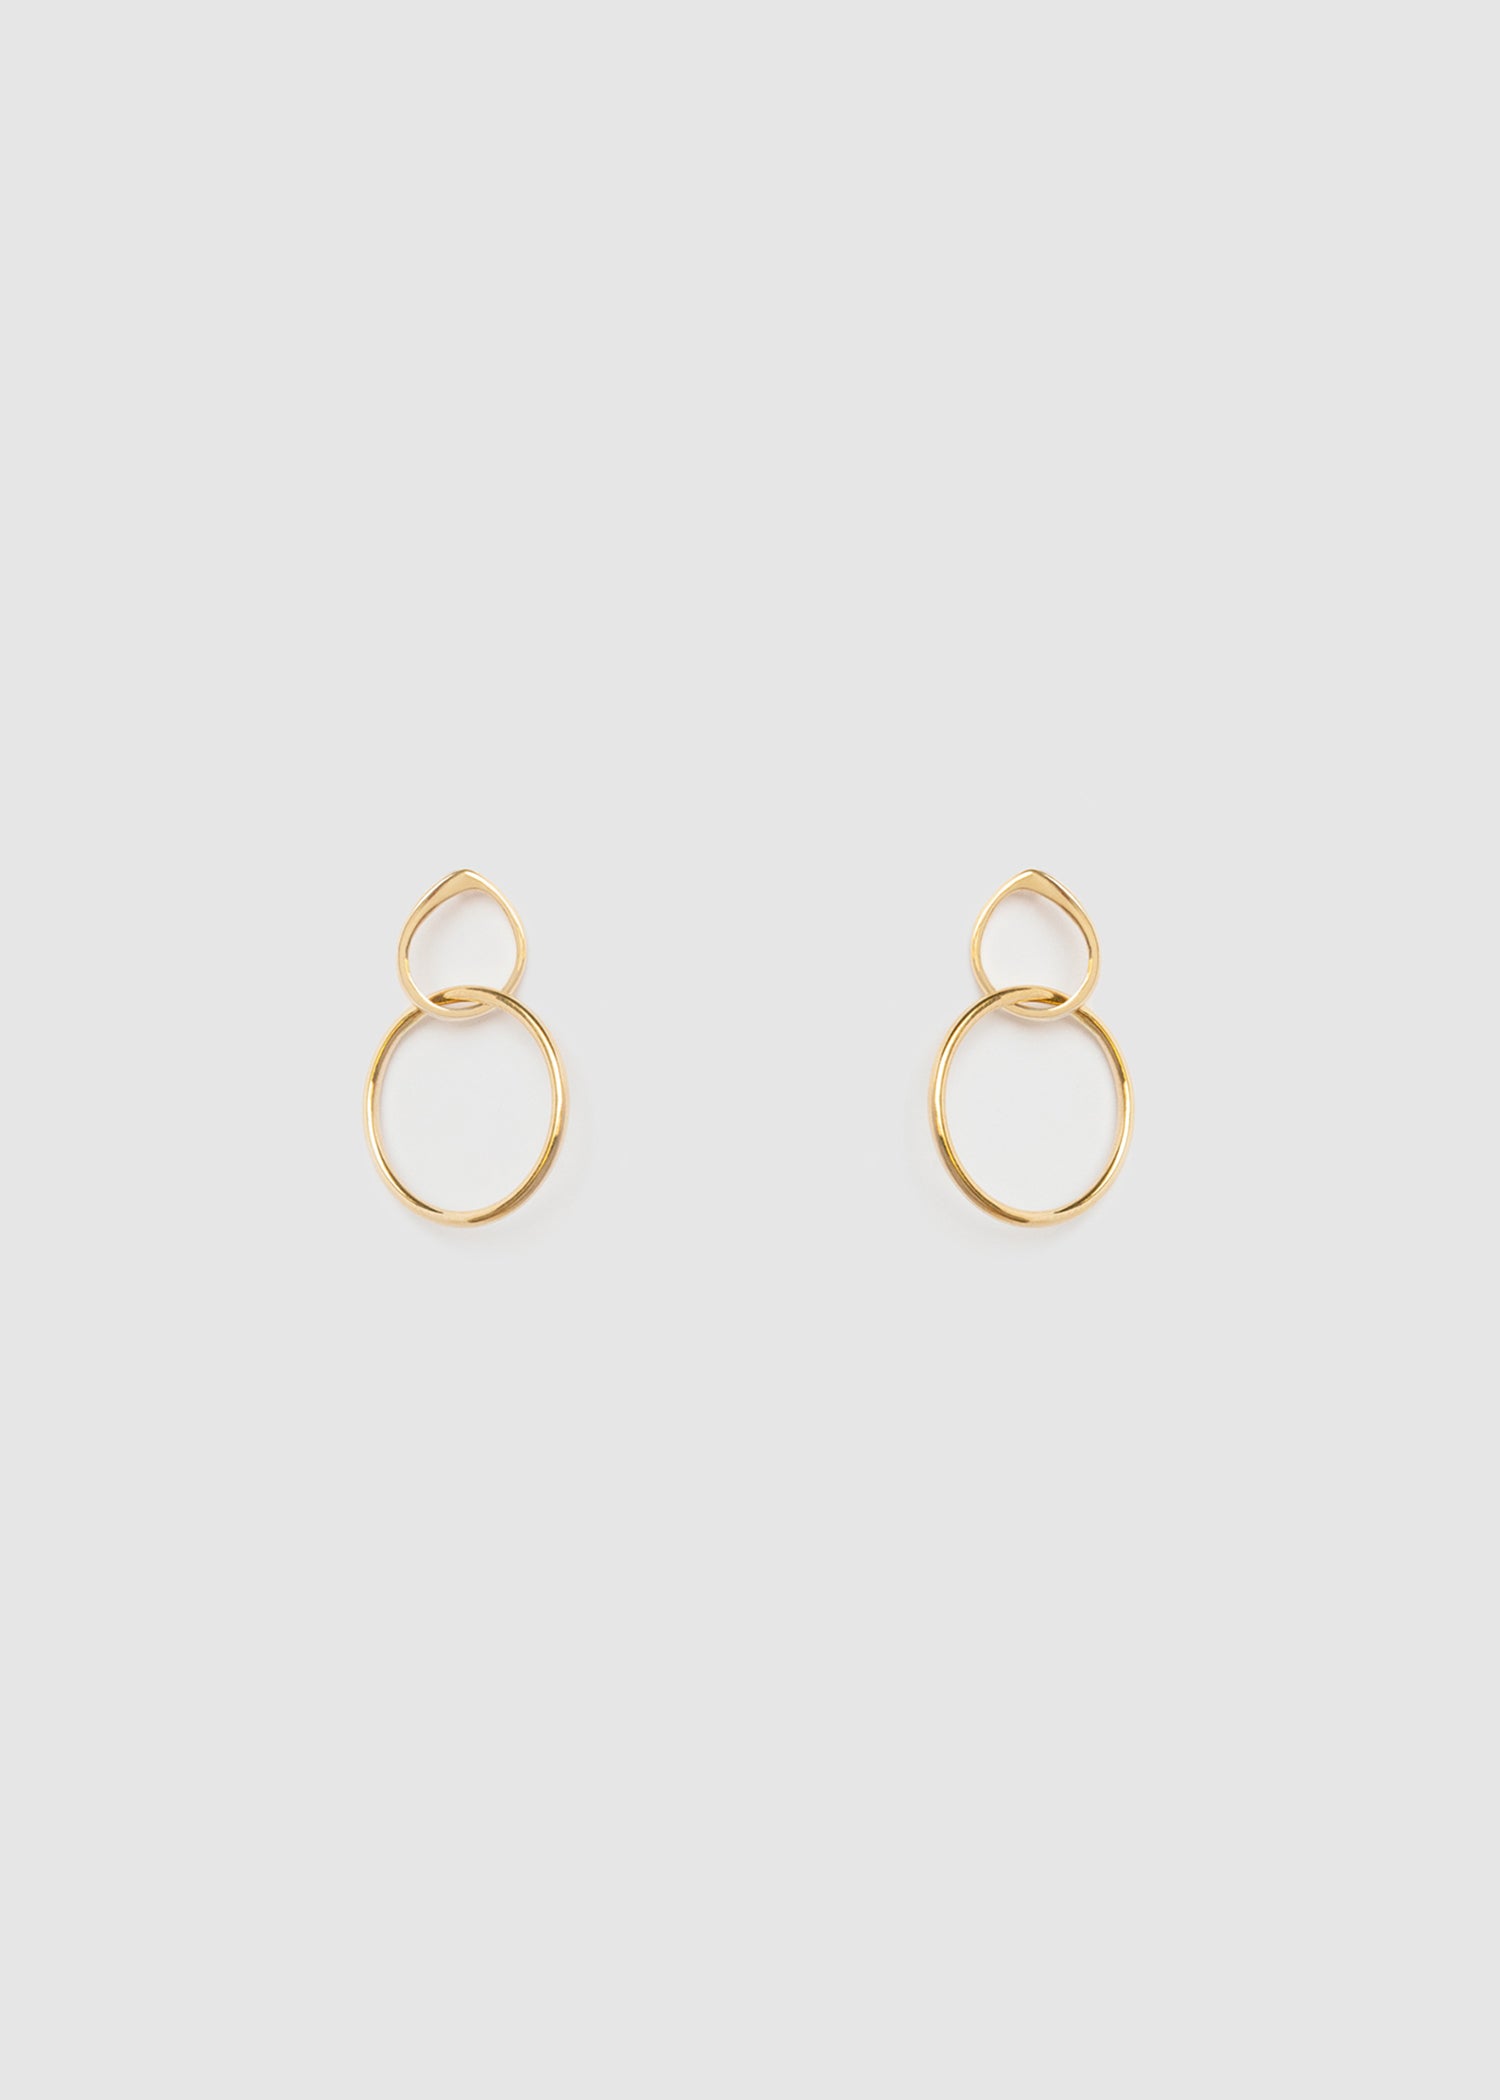 In Stock | Small Lilia Hoops